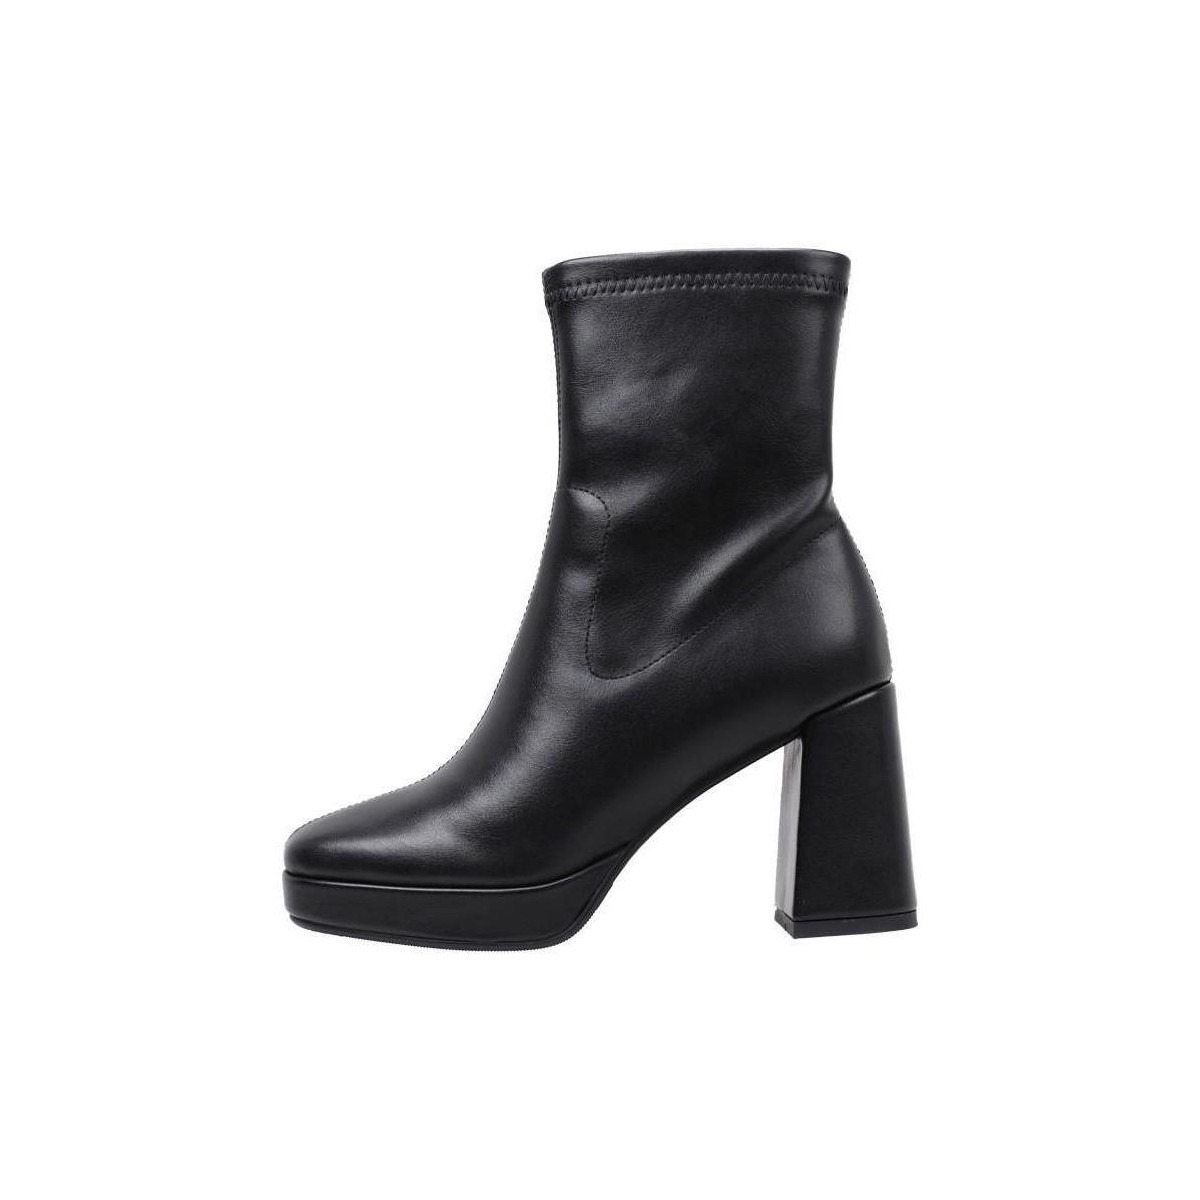 Krack Ankle Boots in Black for Women at Spartoo GOOFASH